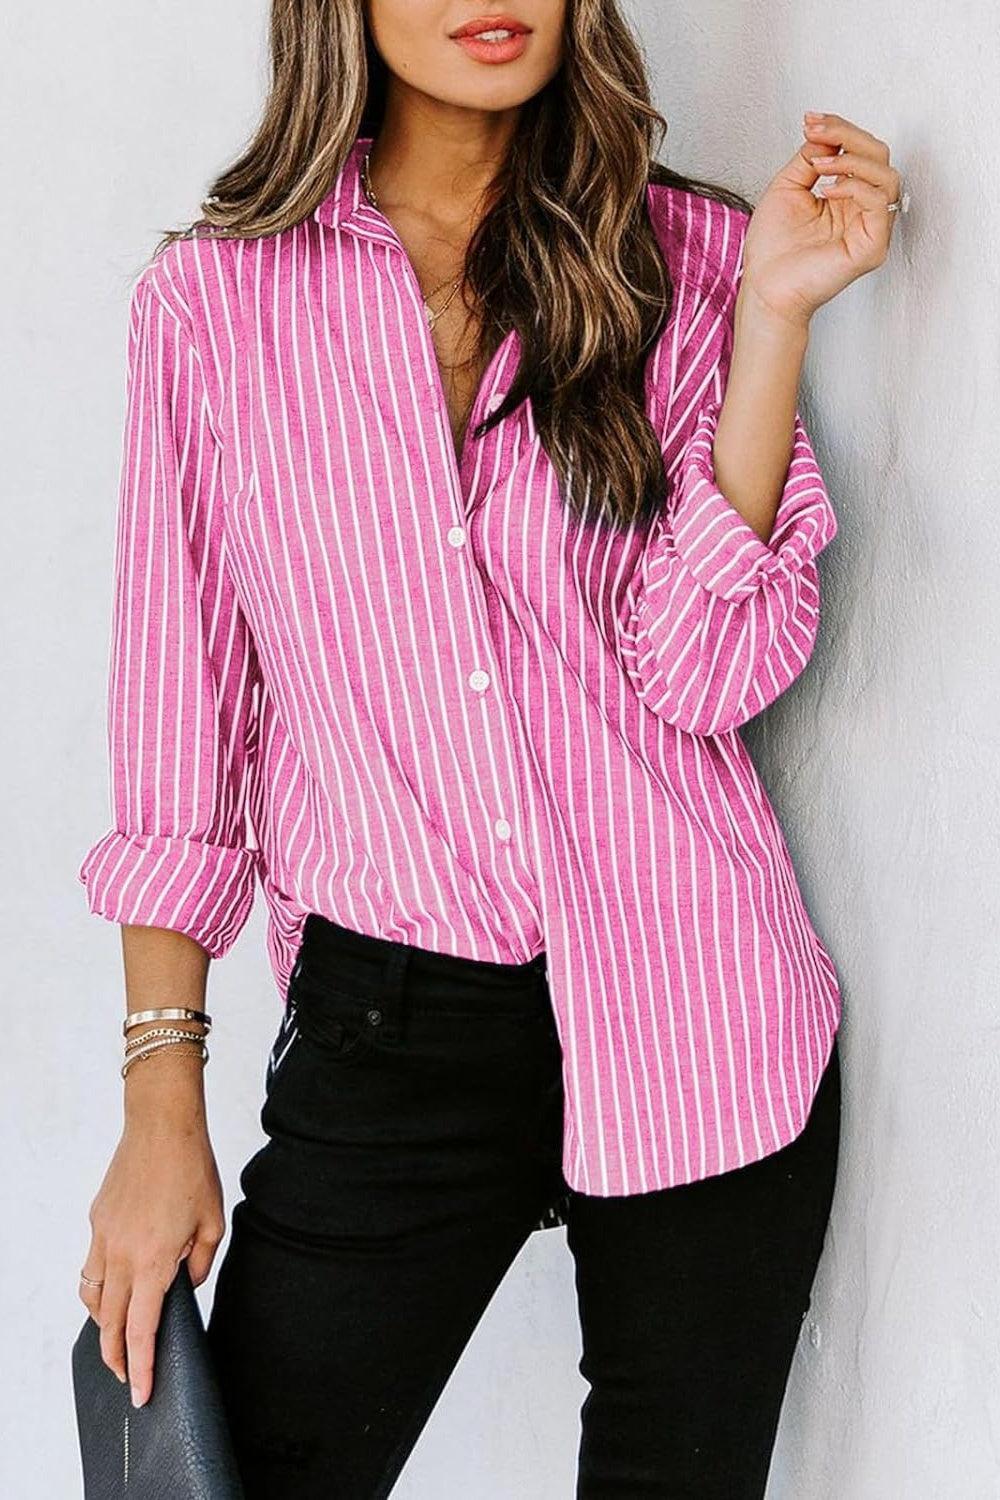 a woman leaning against a wall wearing a pink and white striped shirt